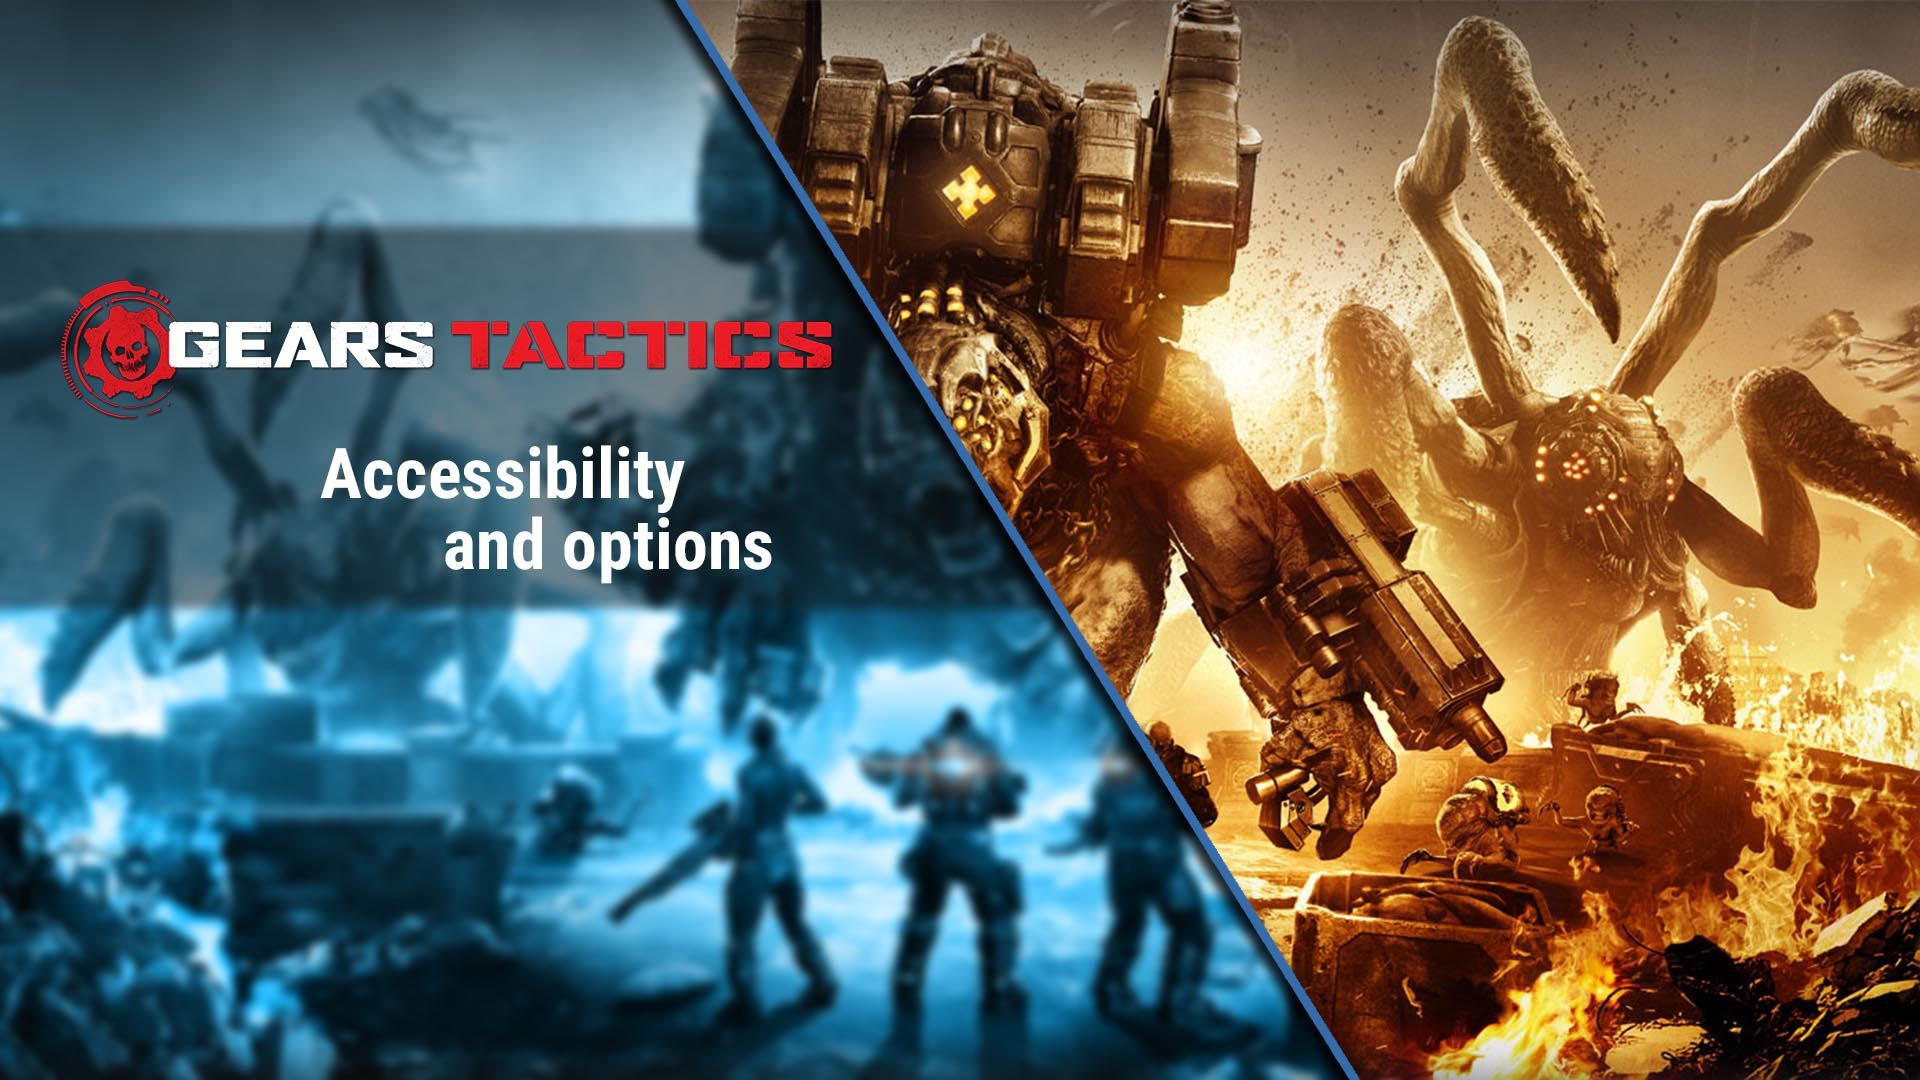 Gears Tactics Accessibility and options featured